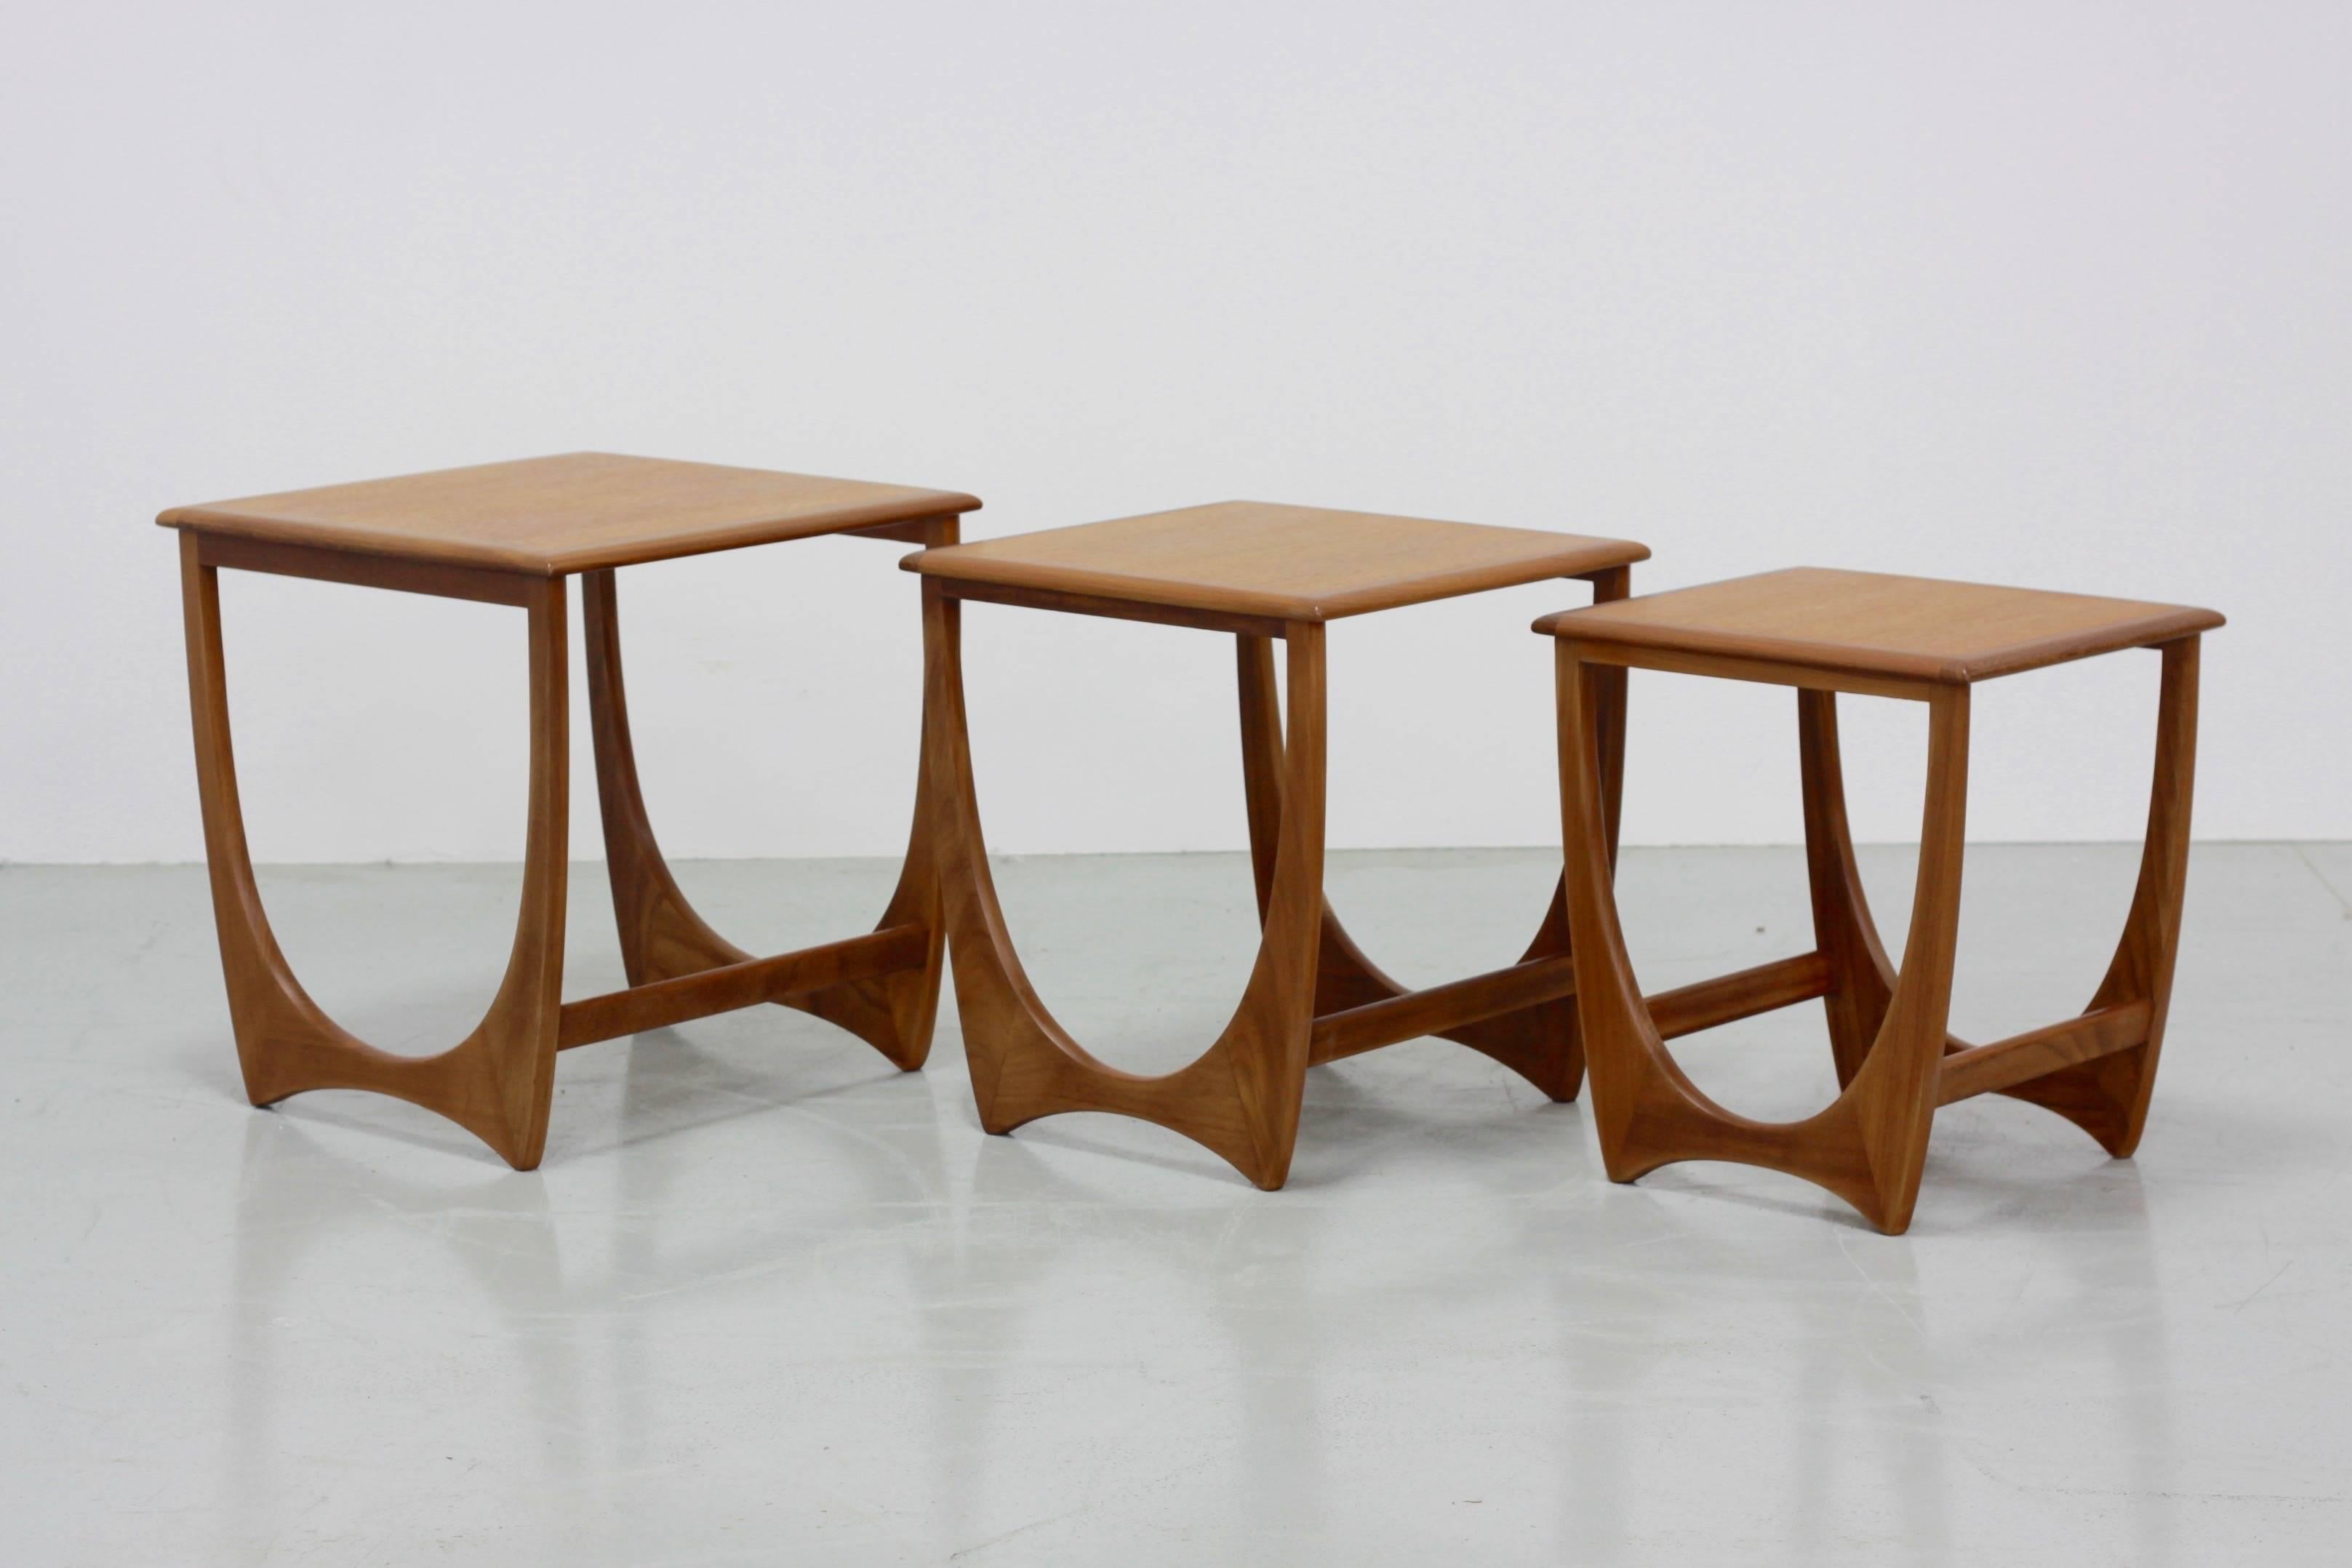 This beautiful set of three Mid-Century Modern Scandinavian style nesting tables in teak, model Astro, was manufactured by G-Plan.